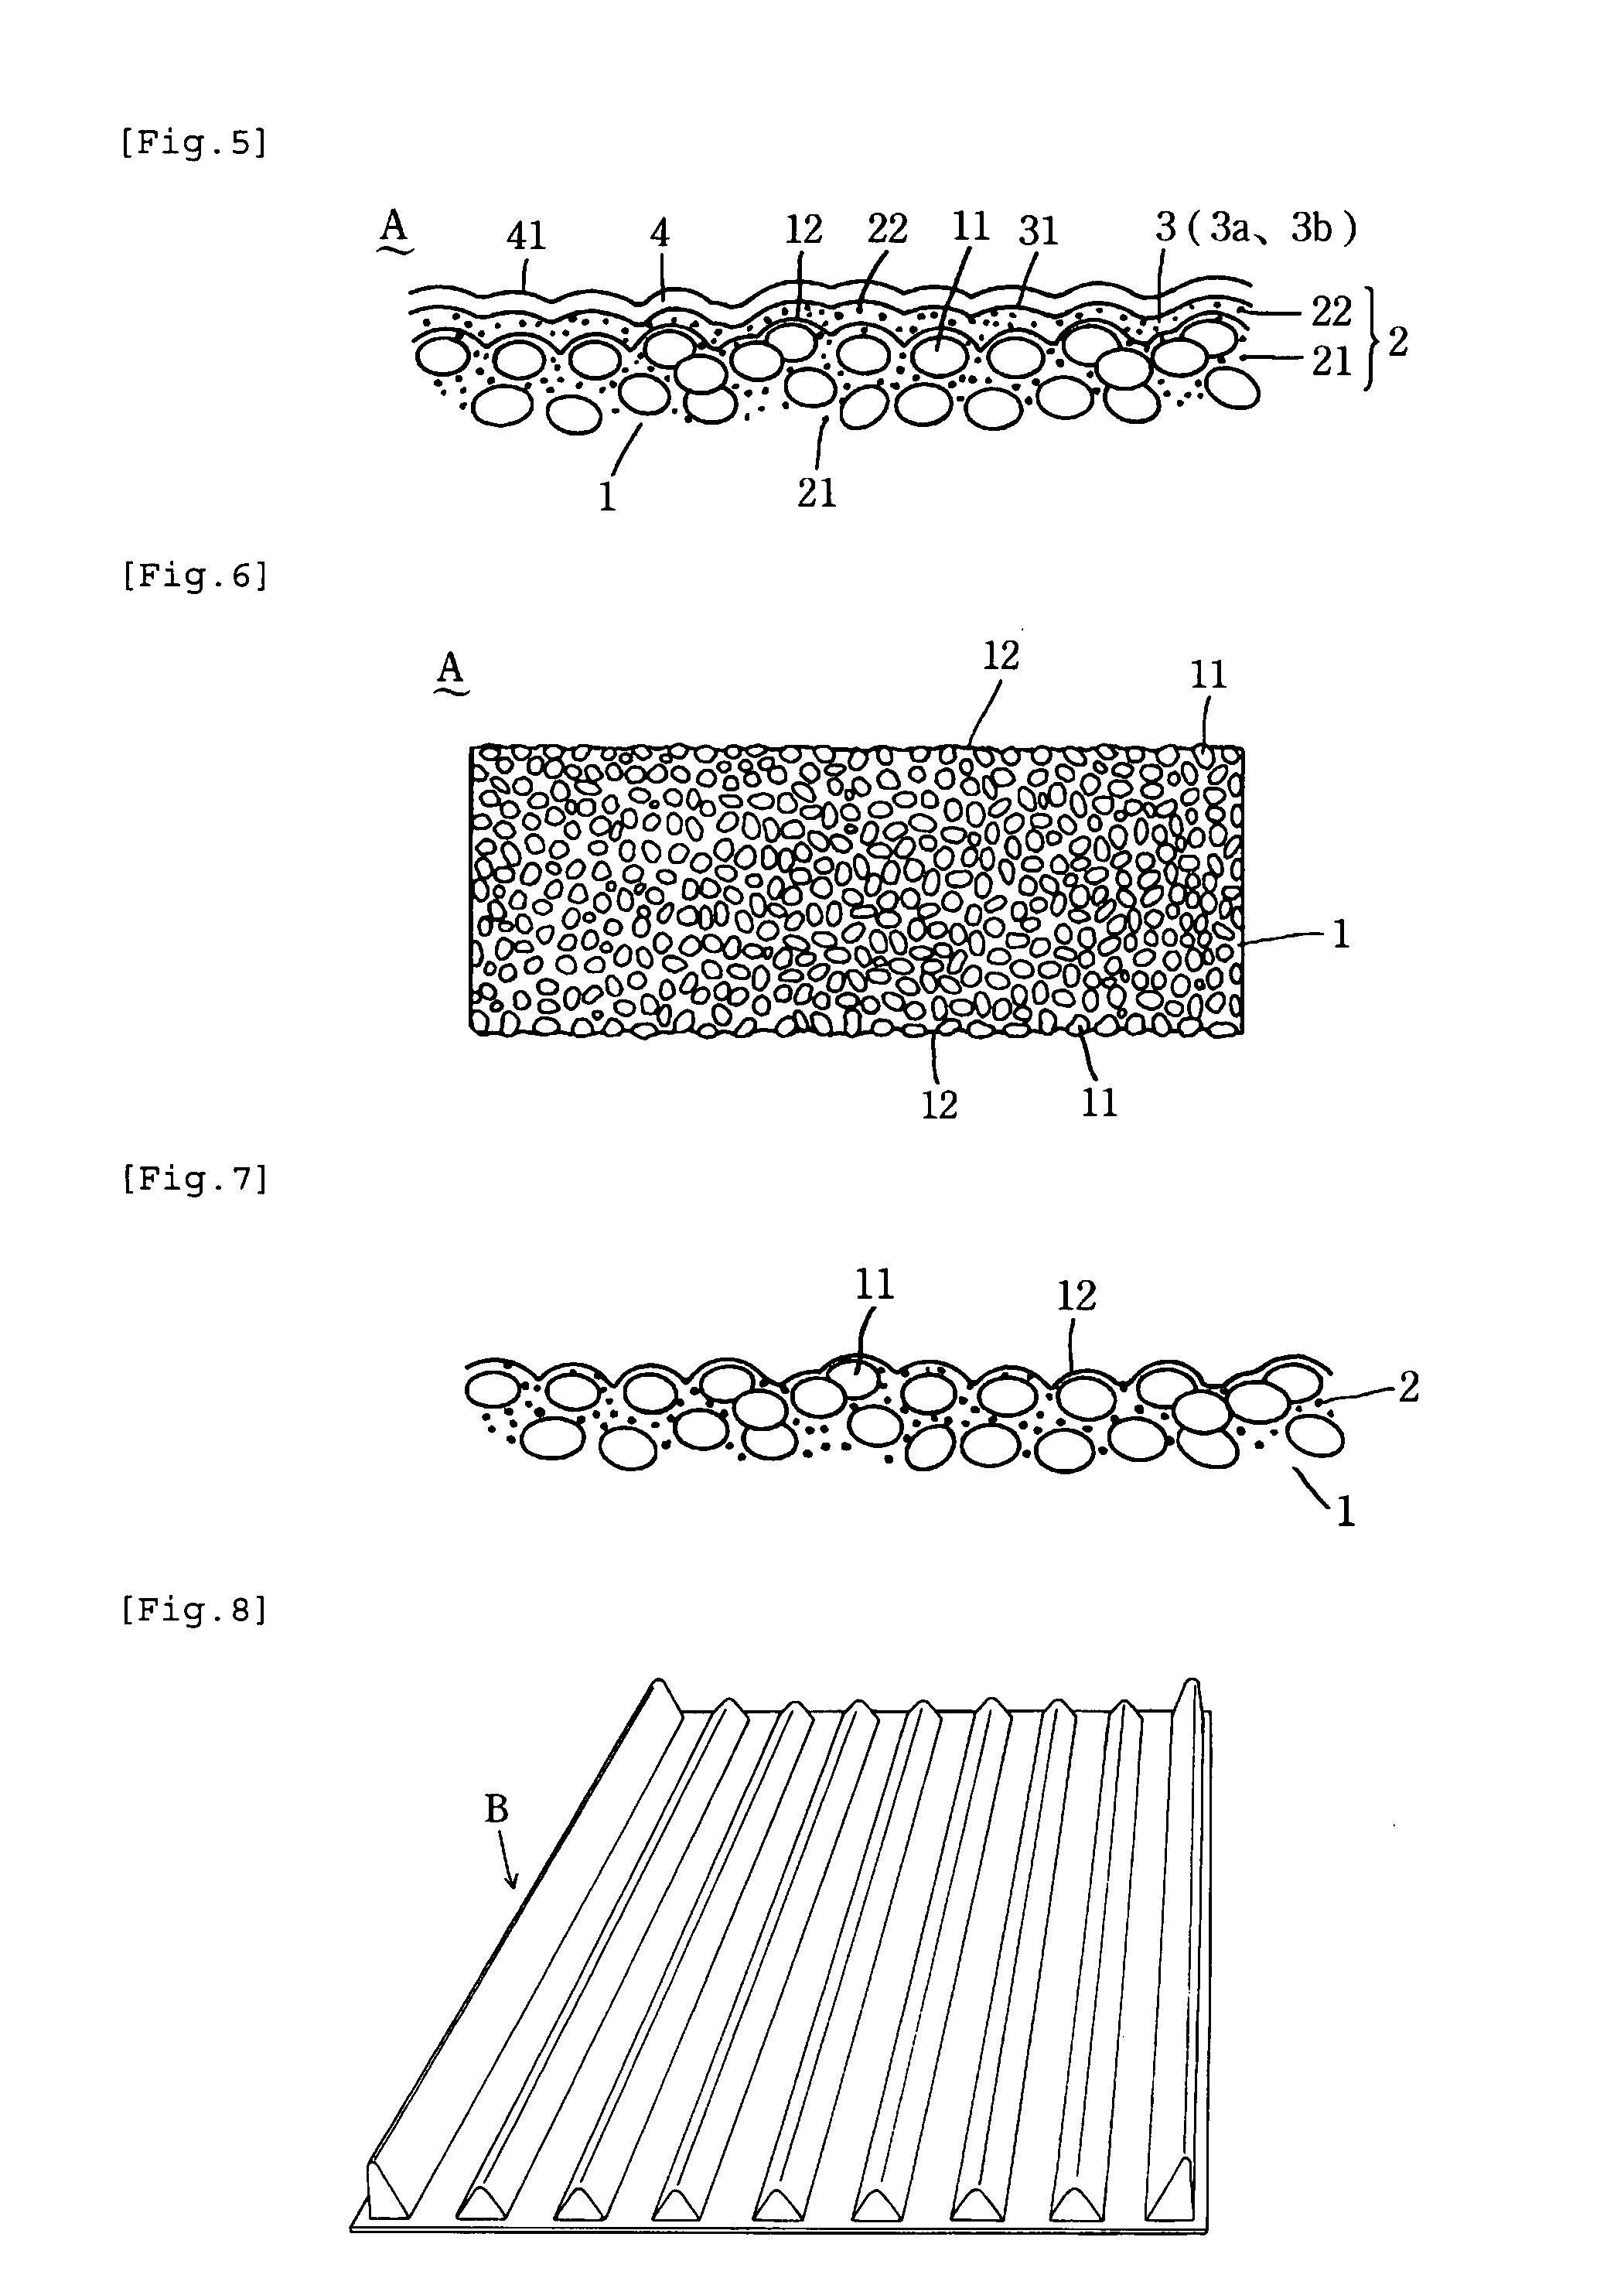 Foamed Sheet for Reflector, Reflector, and Method for Producing Foamed Sheet for Reflector